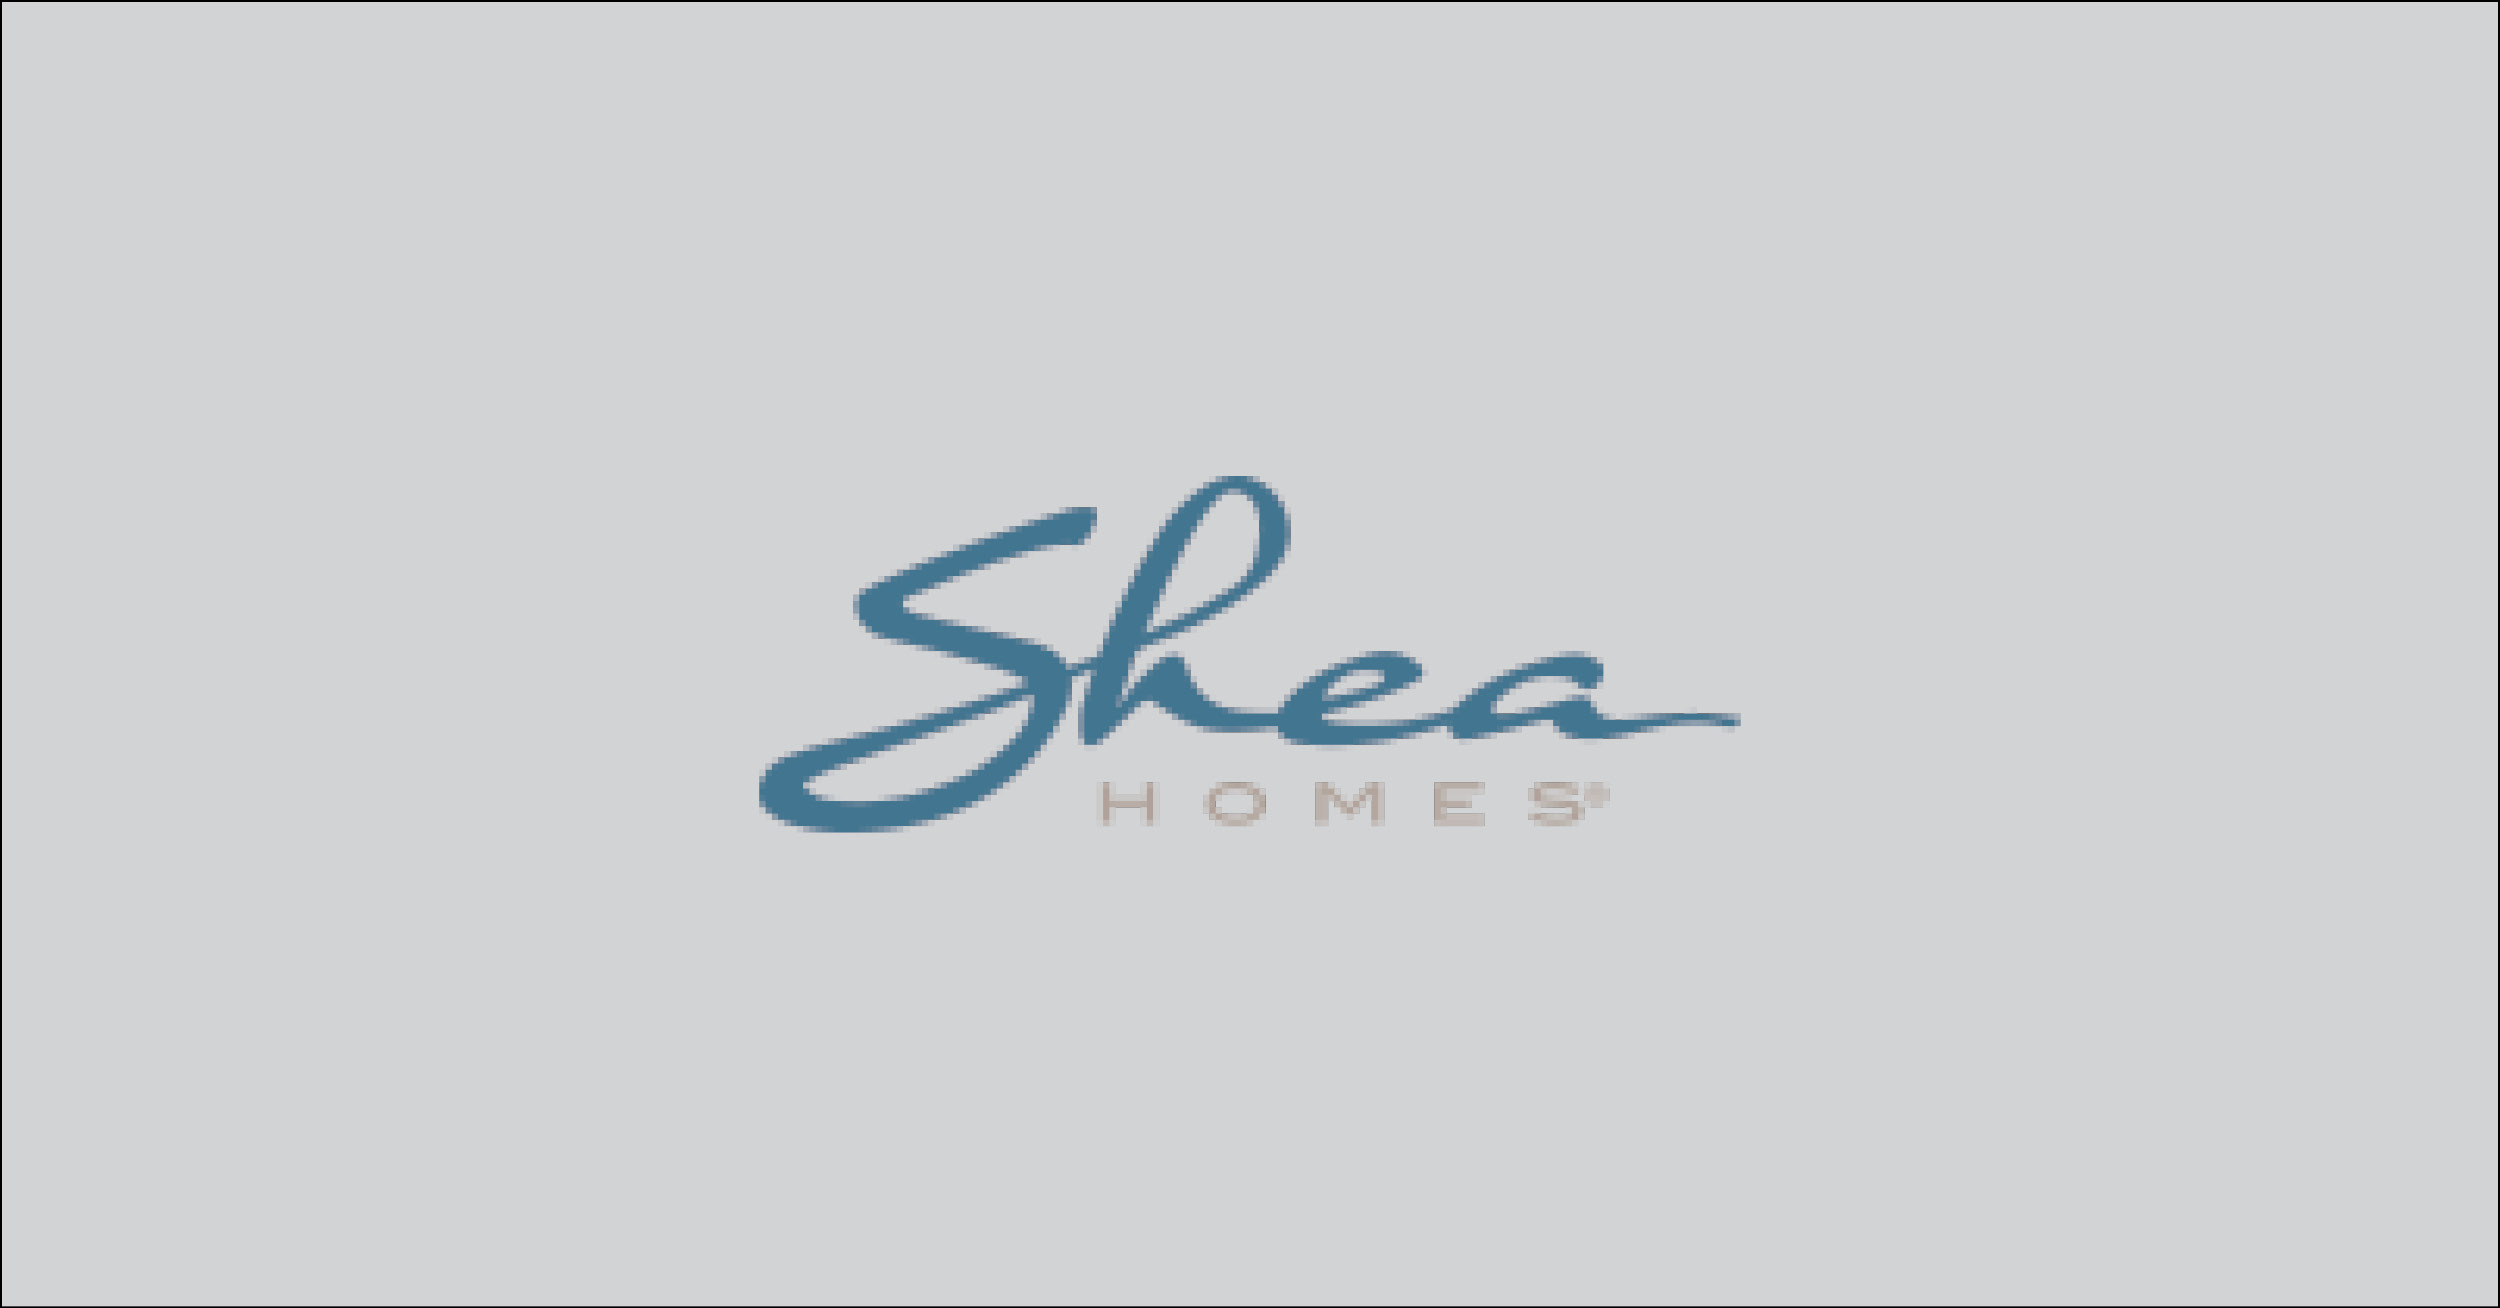 Find new construction or search for new homes and communities by Shea Homes in Colorado